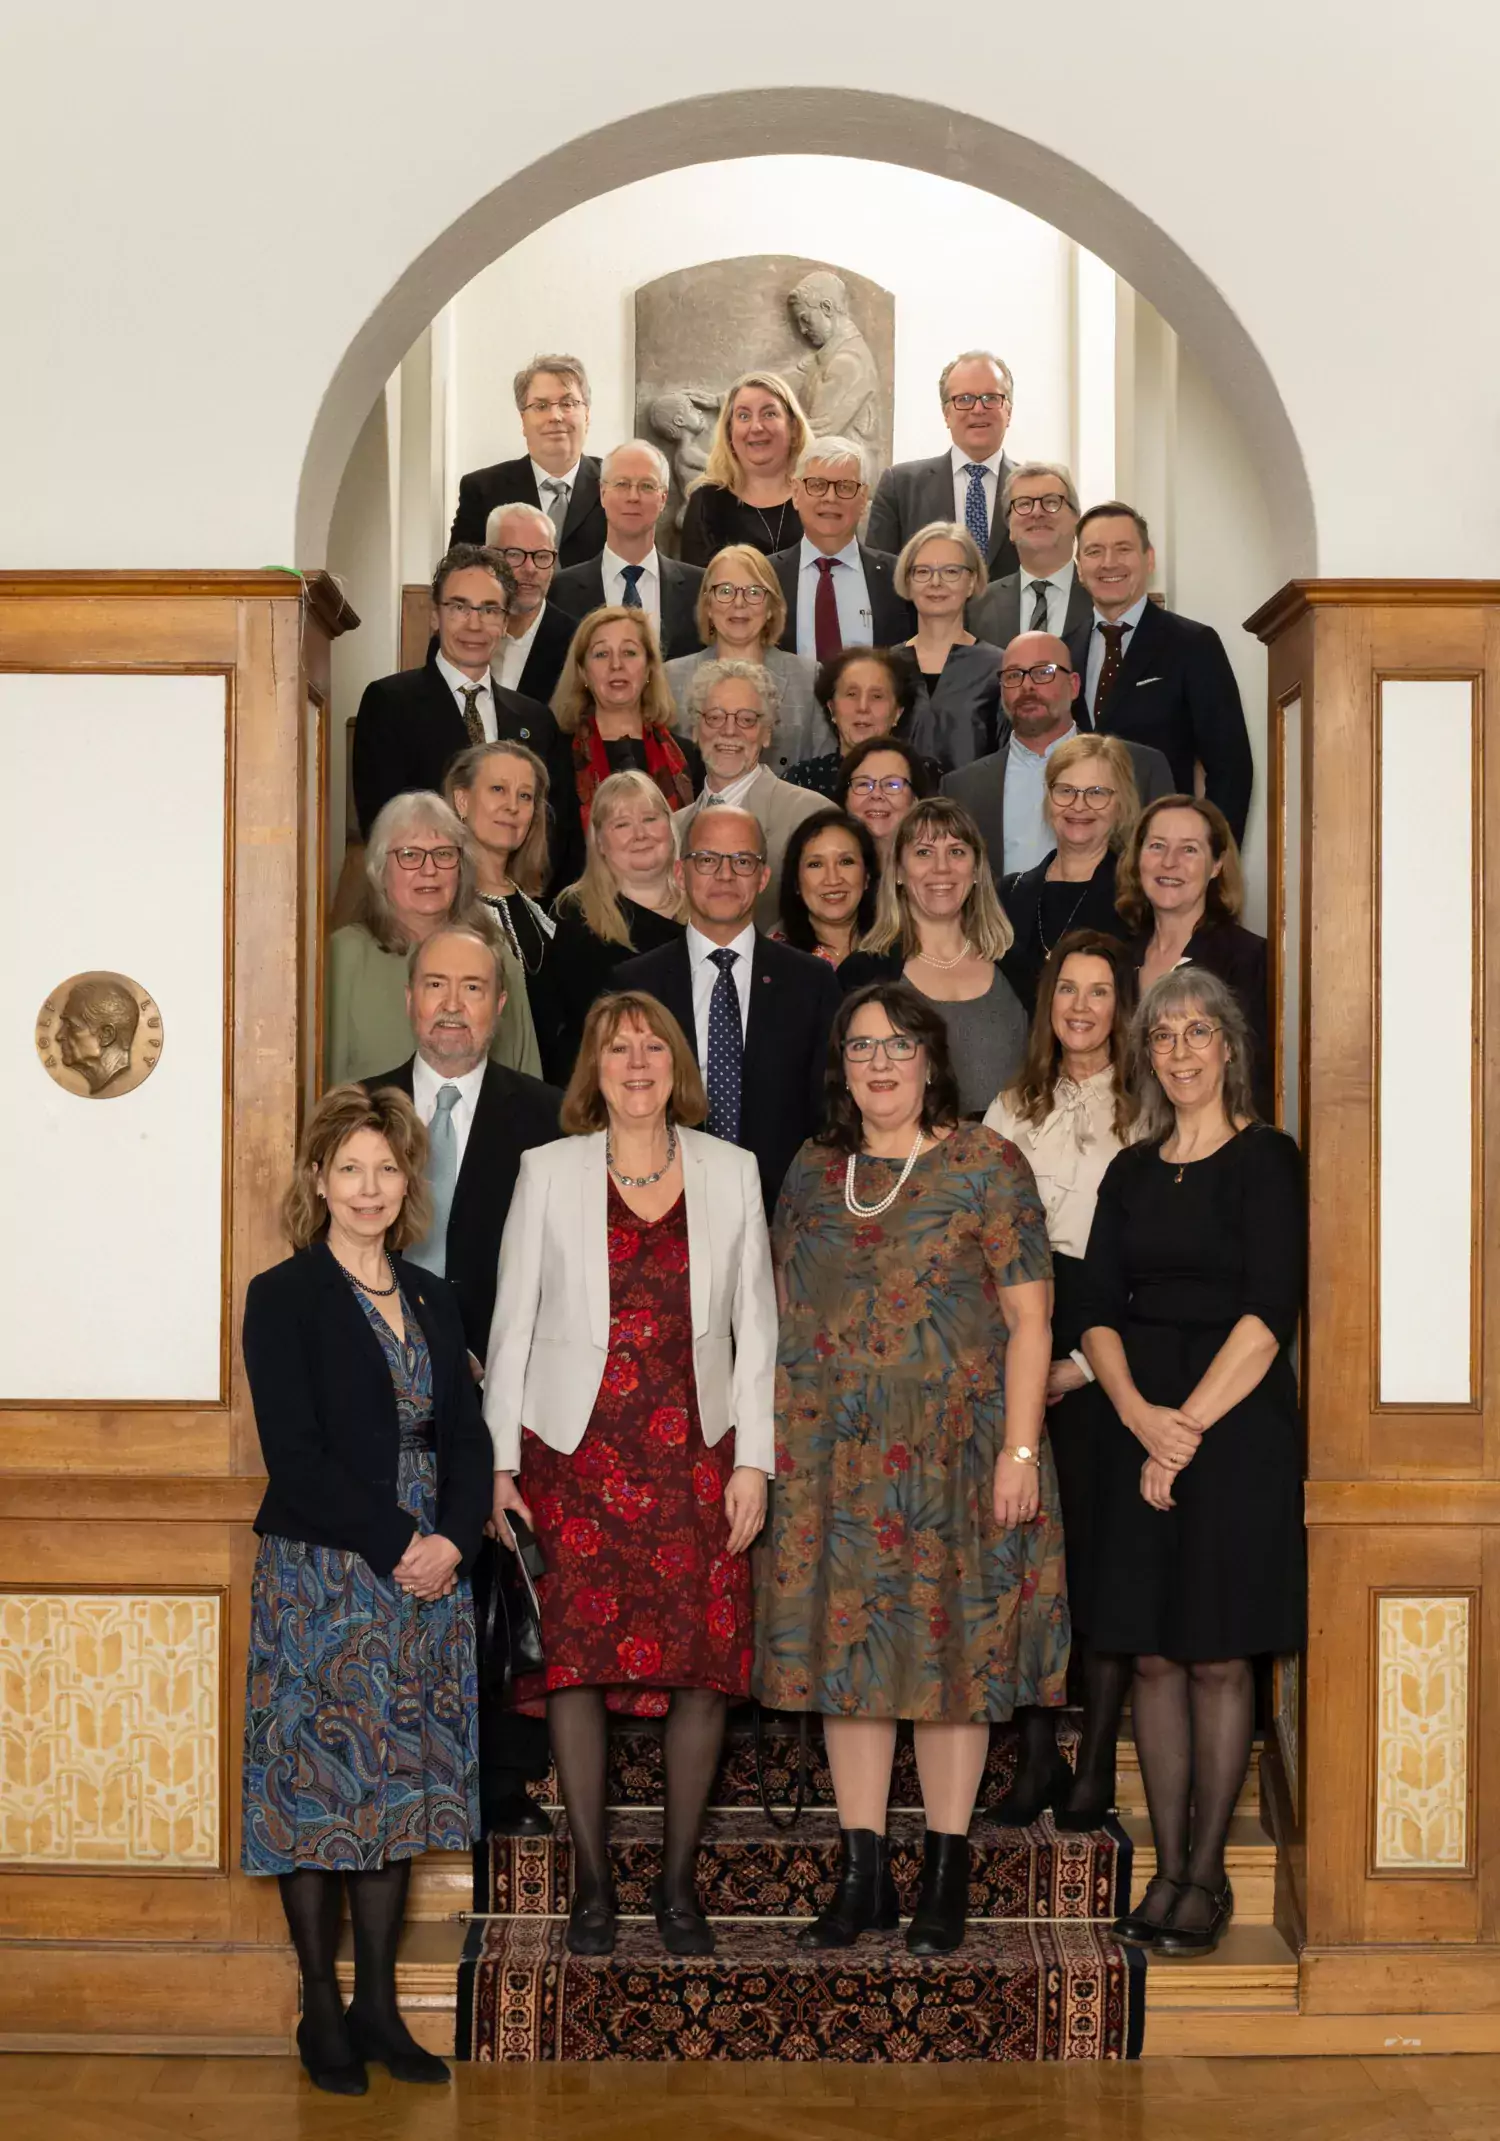 Group photo on the stairs of the recipients of the 2023 Nit och Redlighet Award.